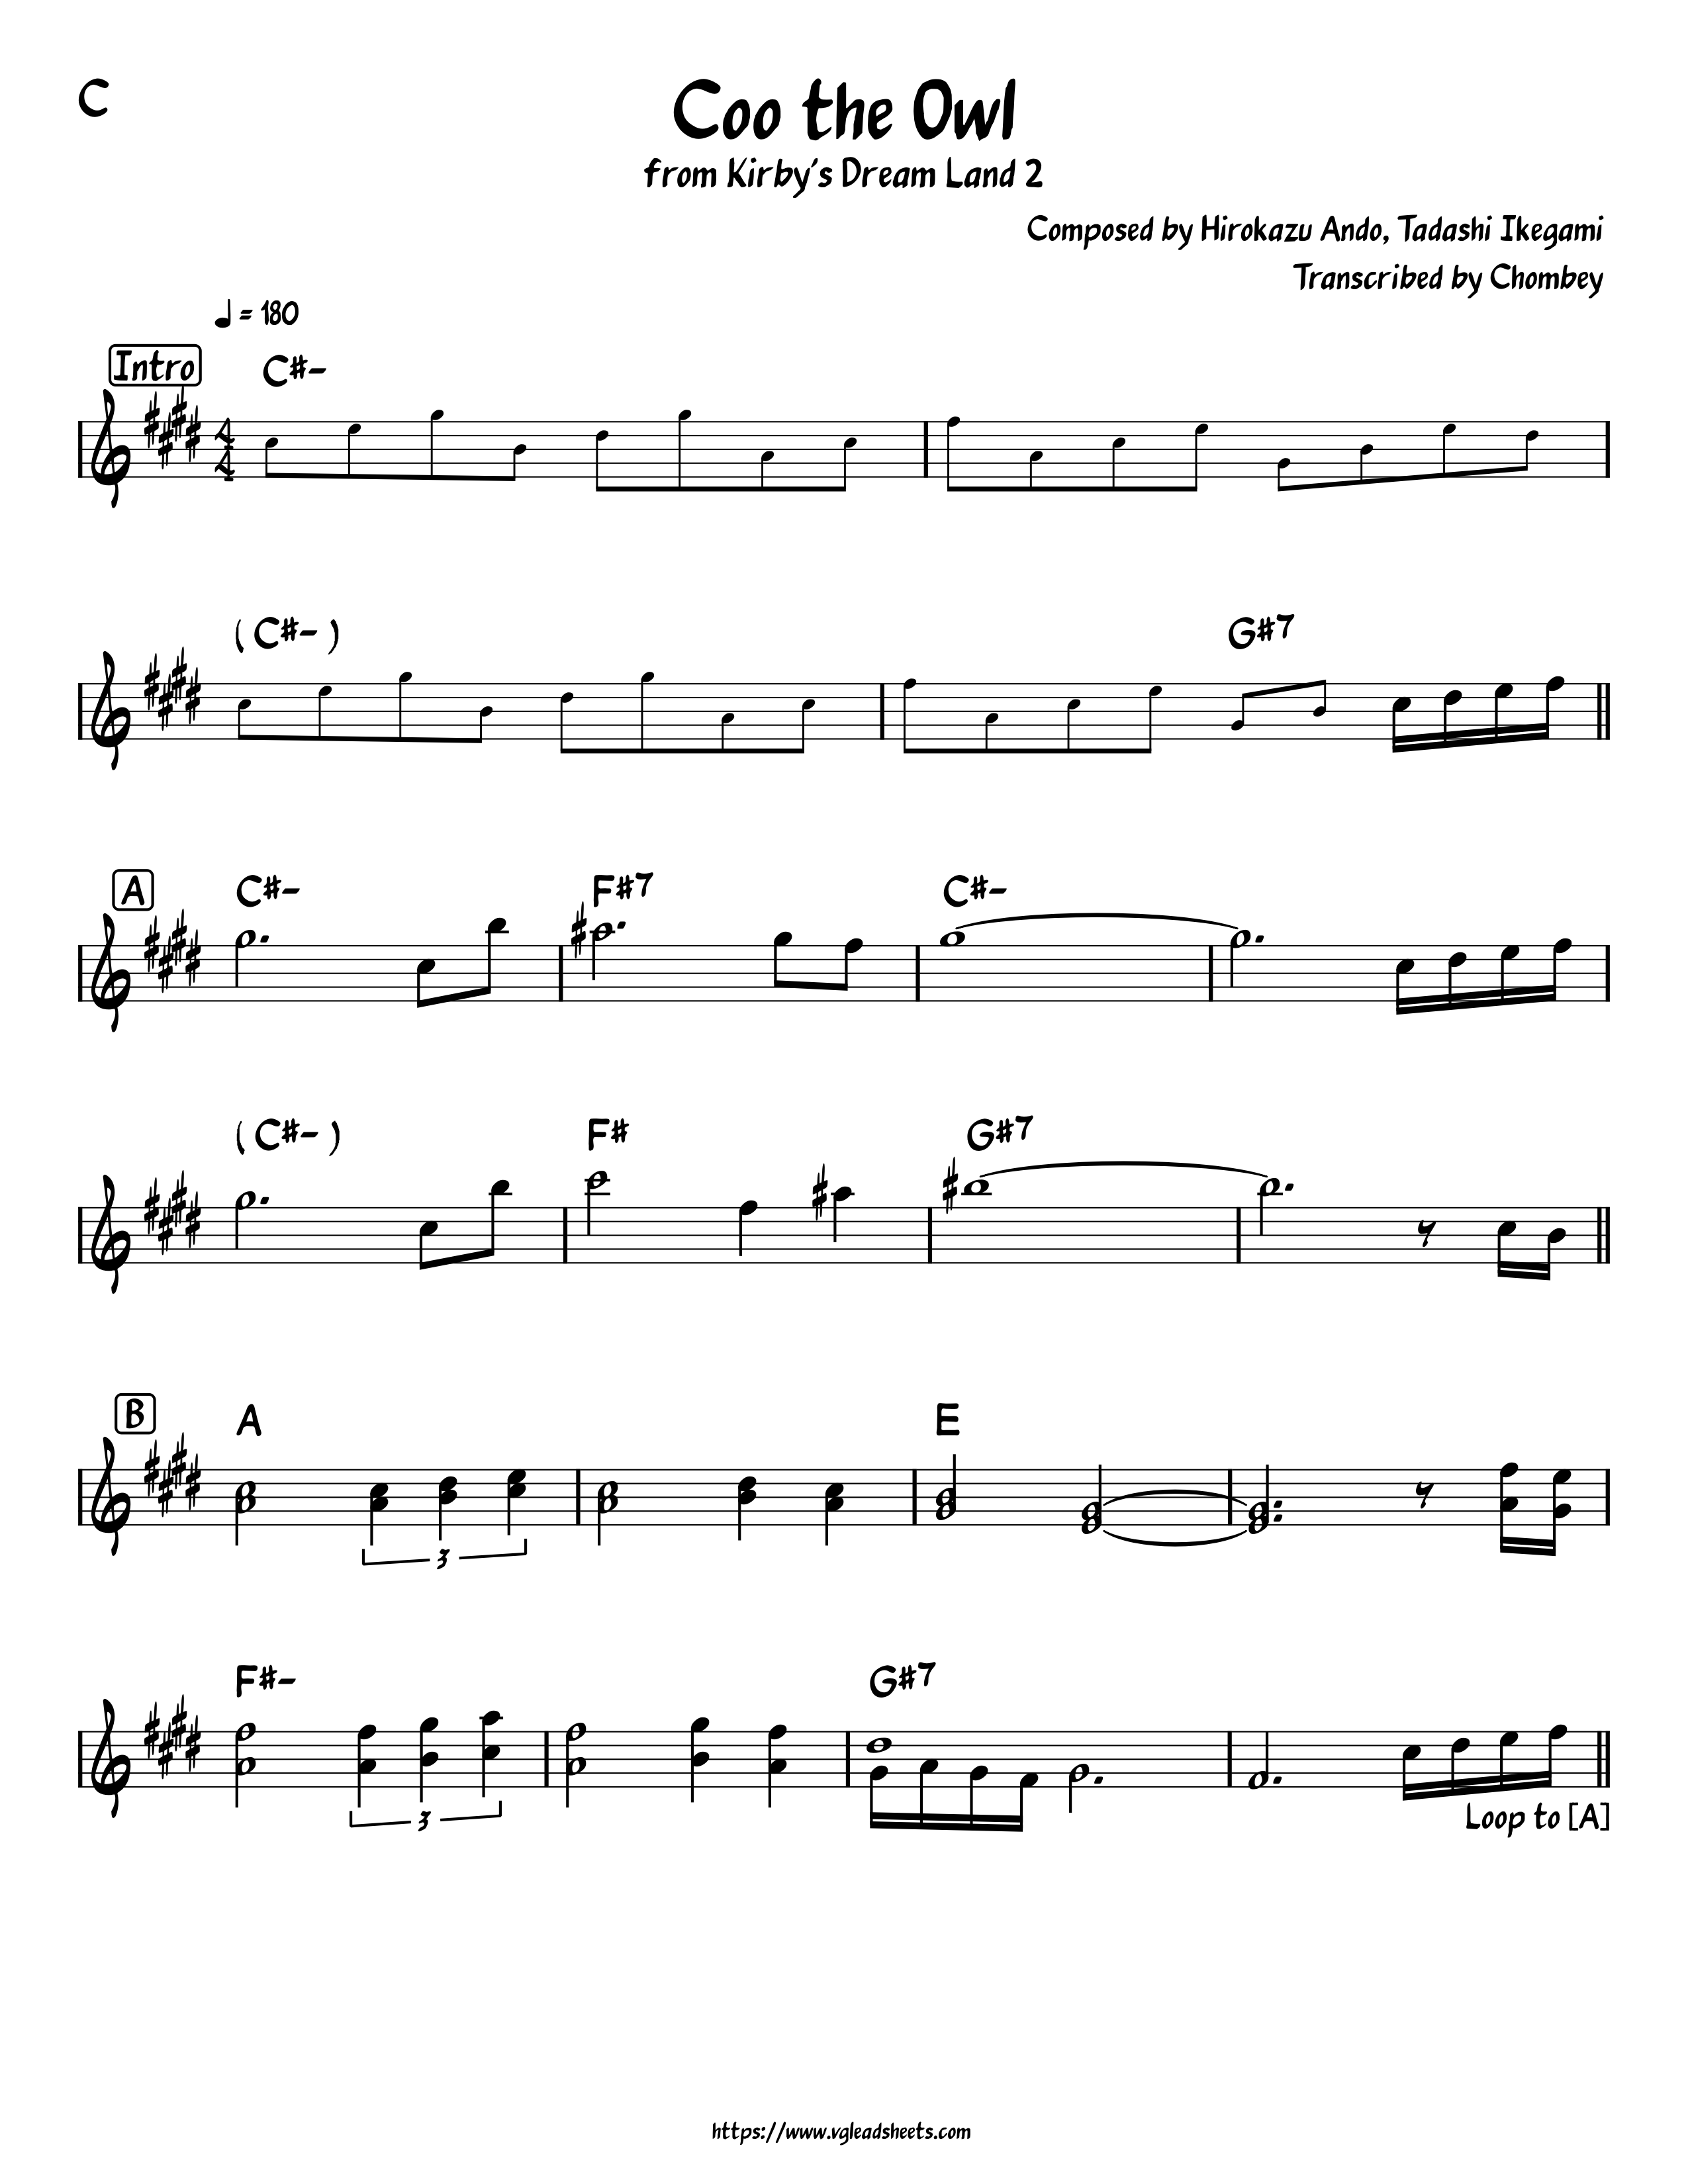 Kirby's Dream Land 2 - Coo the Owl  - Lead Sheets for  Video Game Music